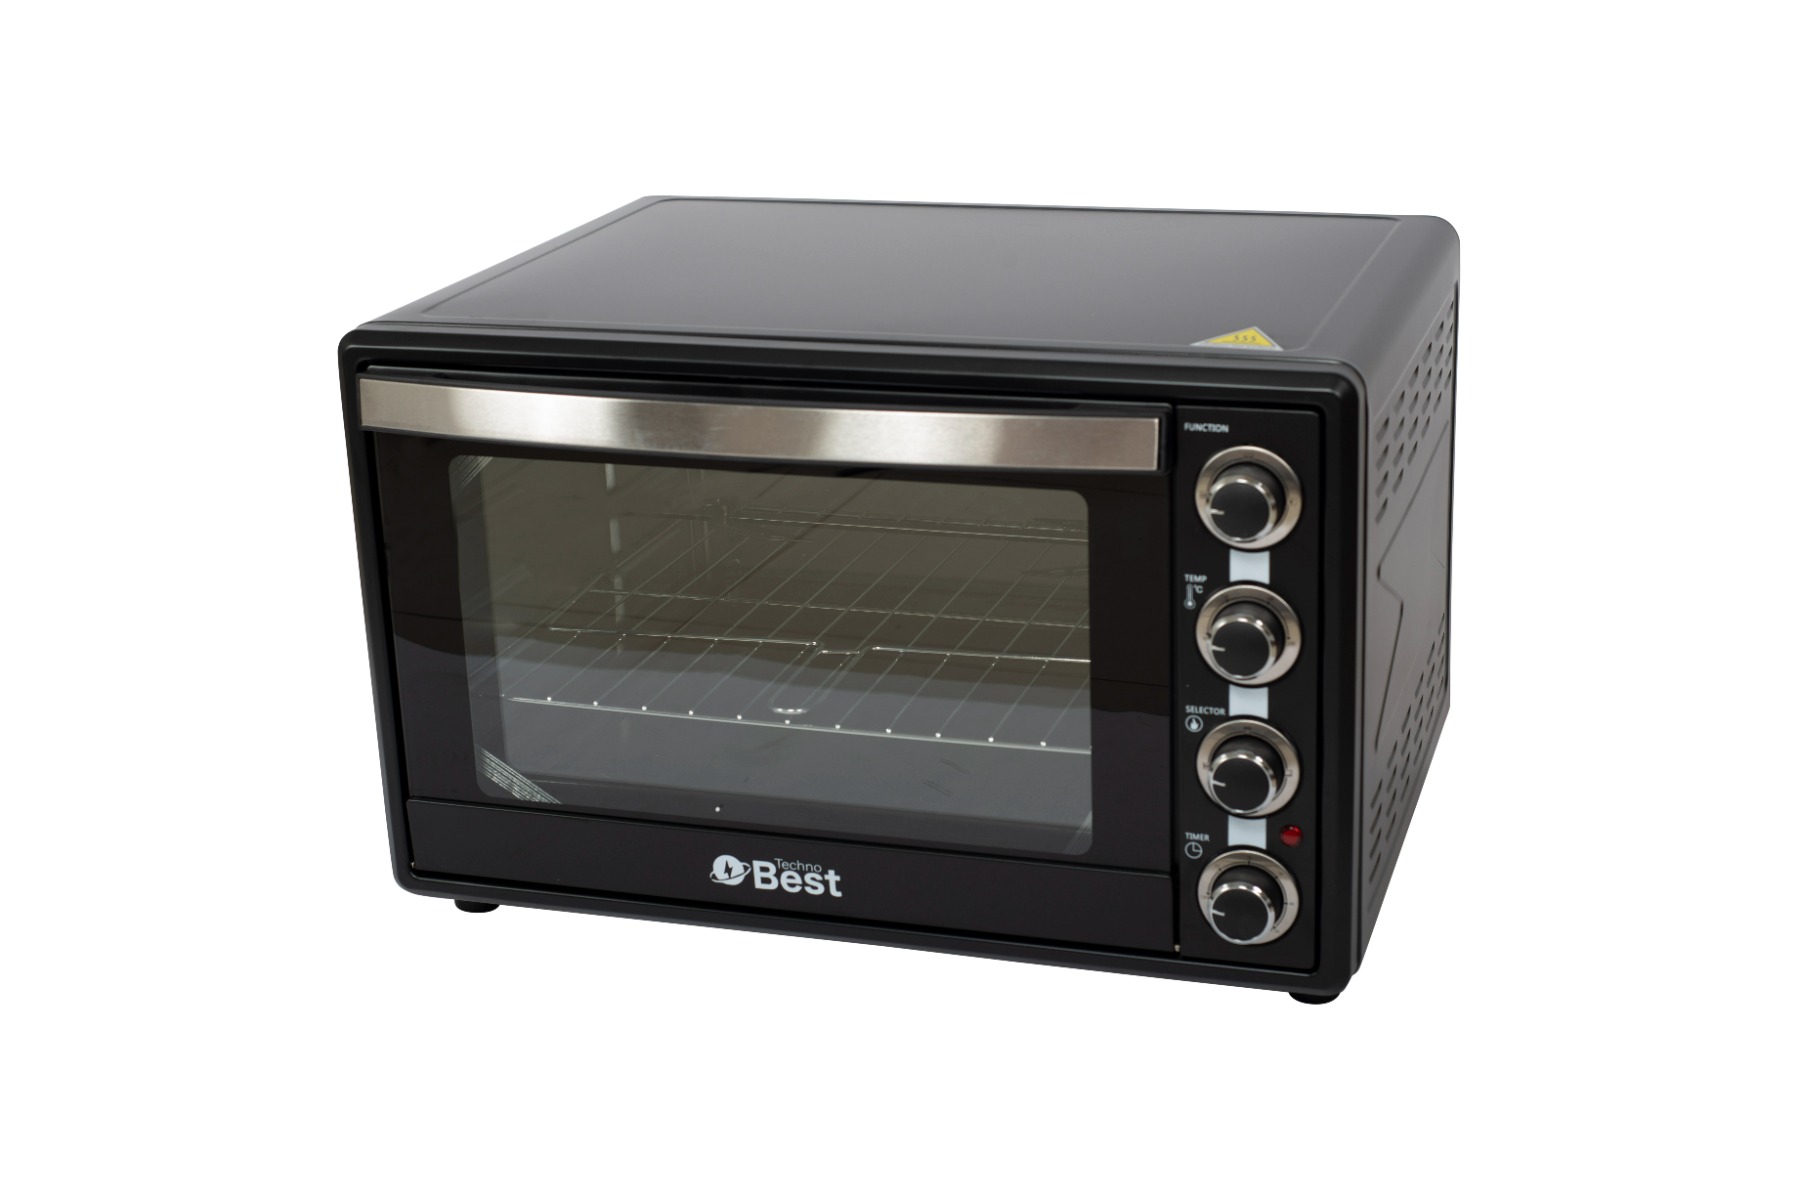 Techno BEST ELECTRIC OVEN With Fan, 60L, DOUBLE GLASS DOOR Black colour housing and stainless steel door handle - BEO-060P